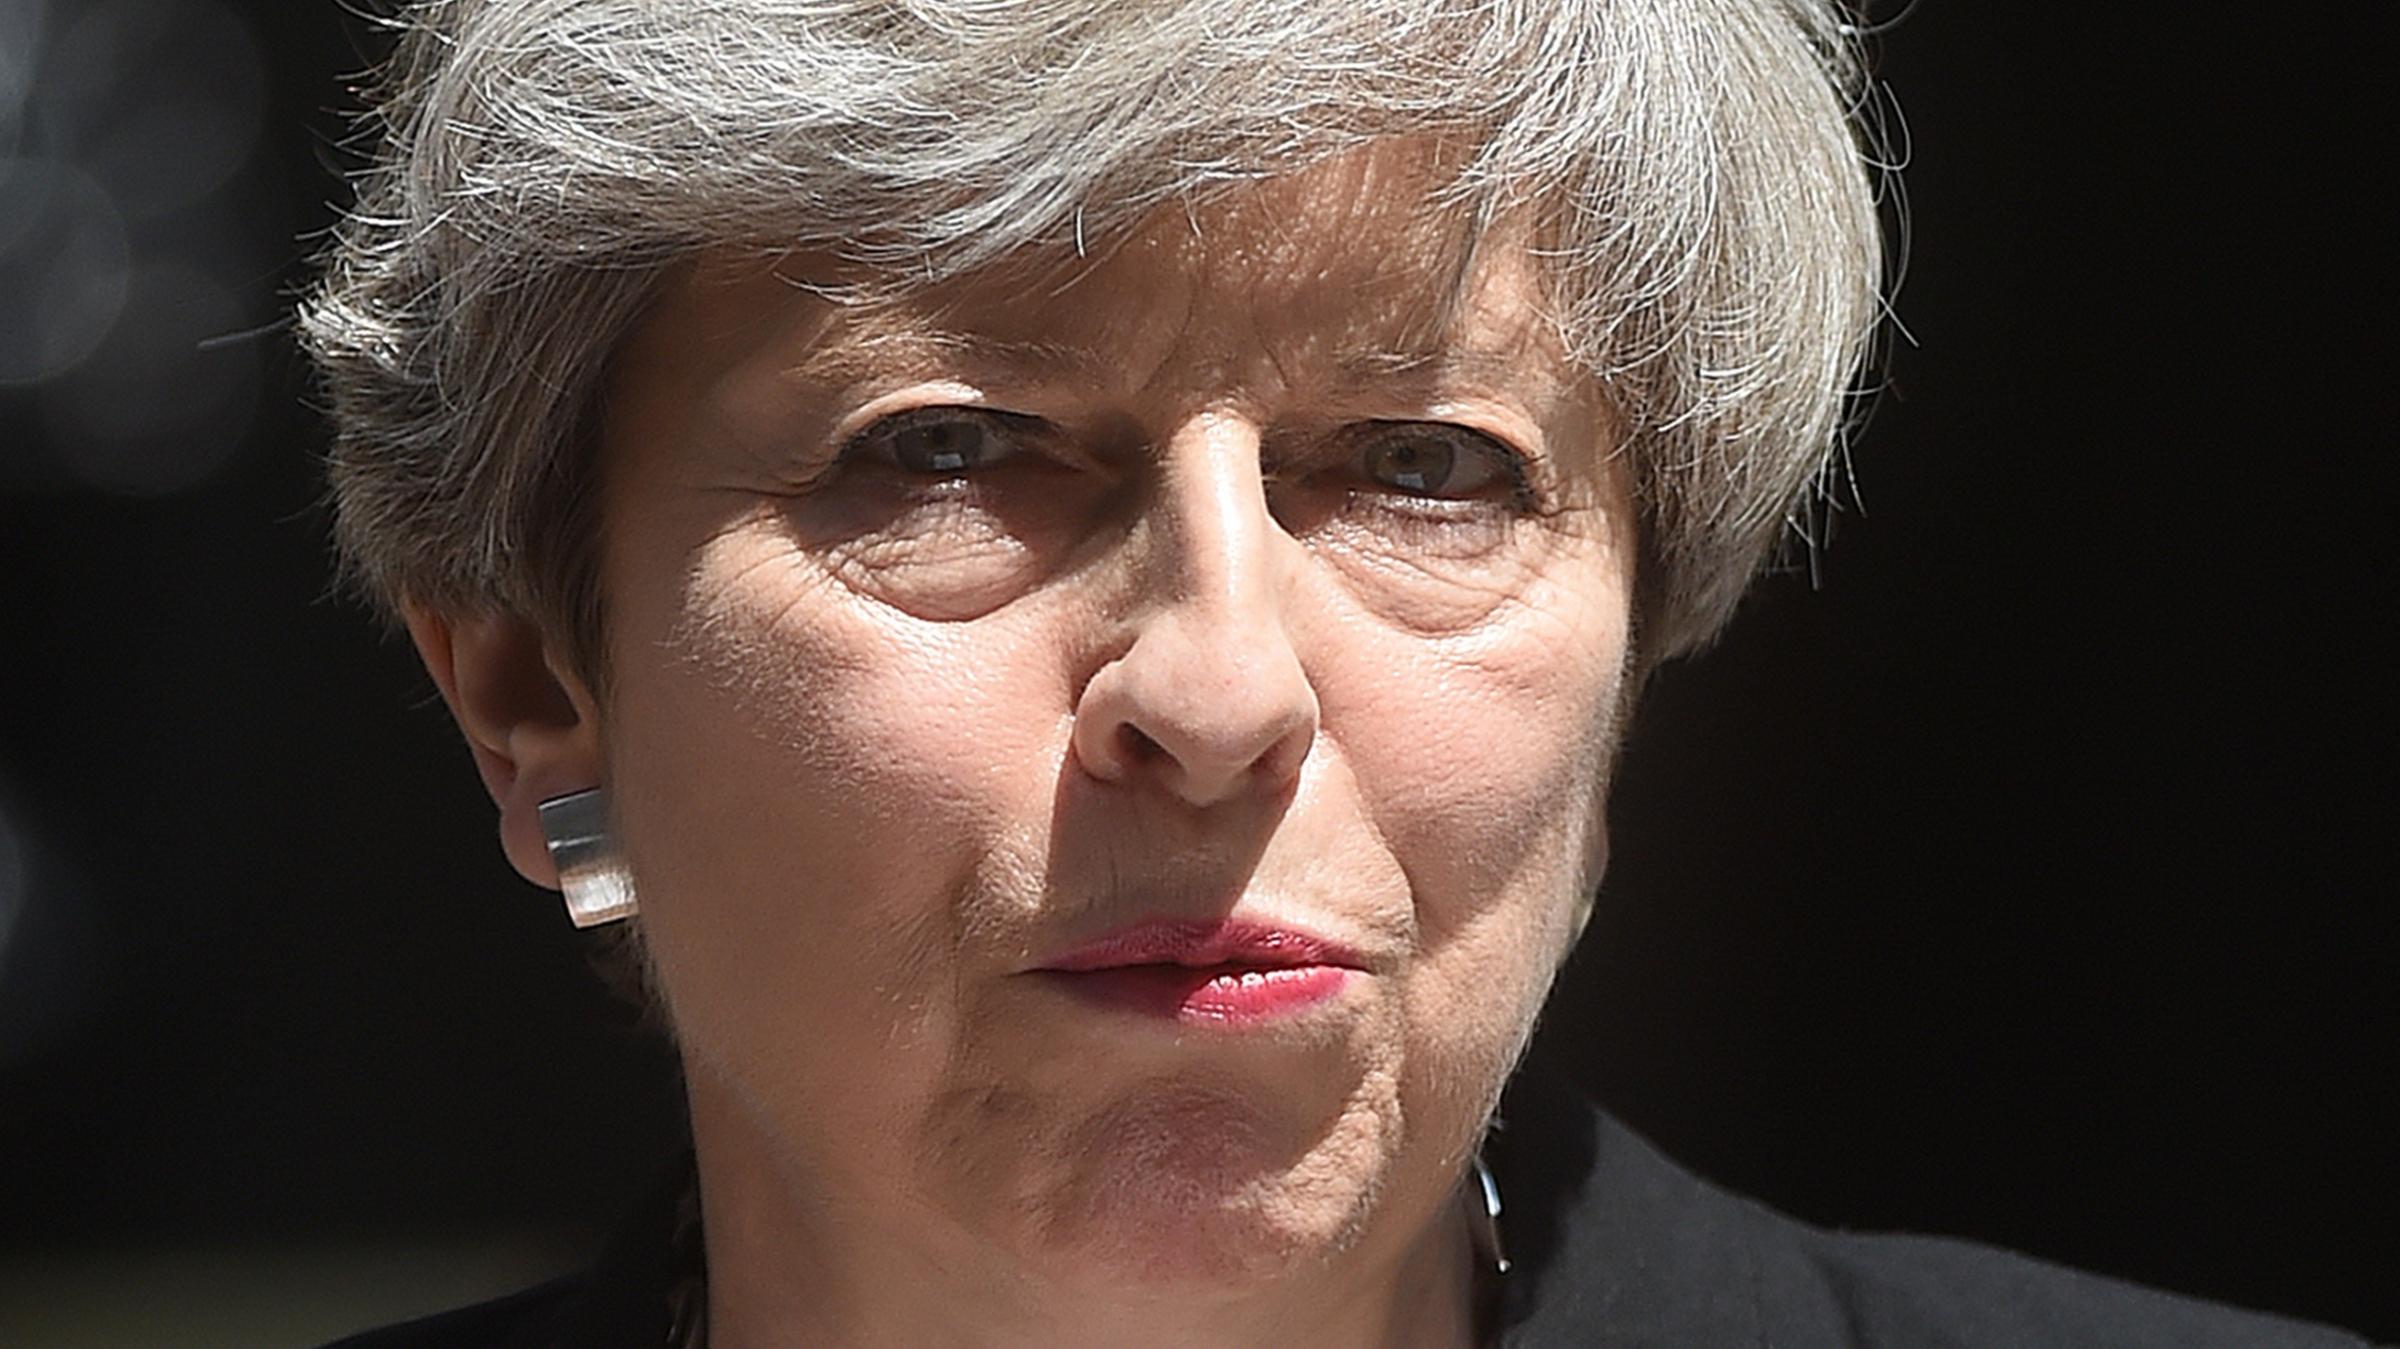 Theresa May 'getting on with job' despite fierce criticism - St Helens Star